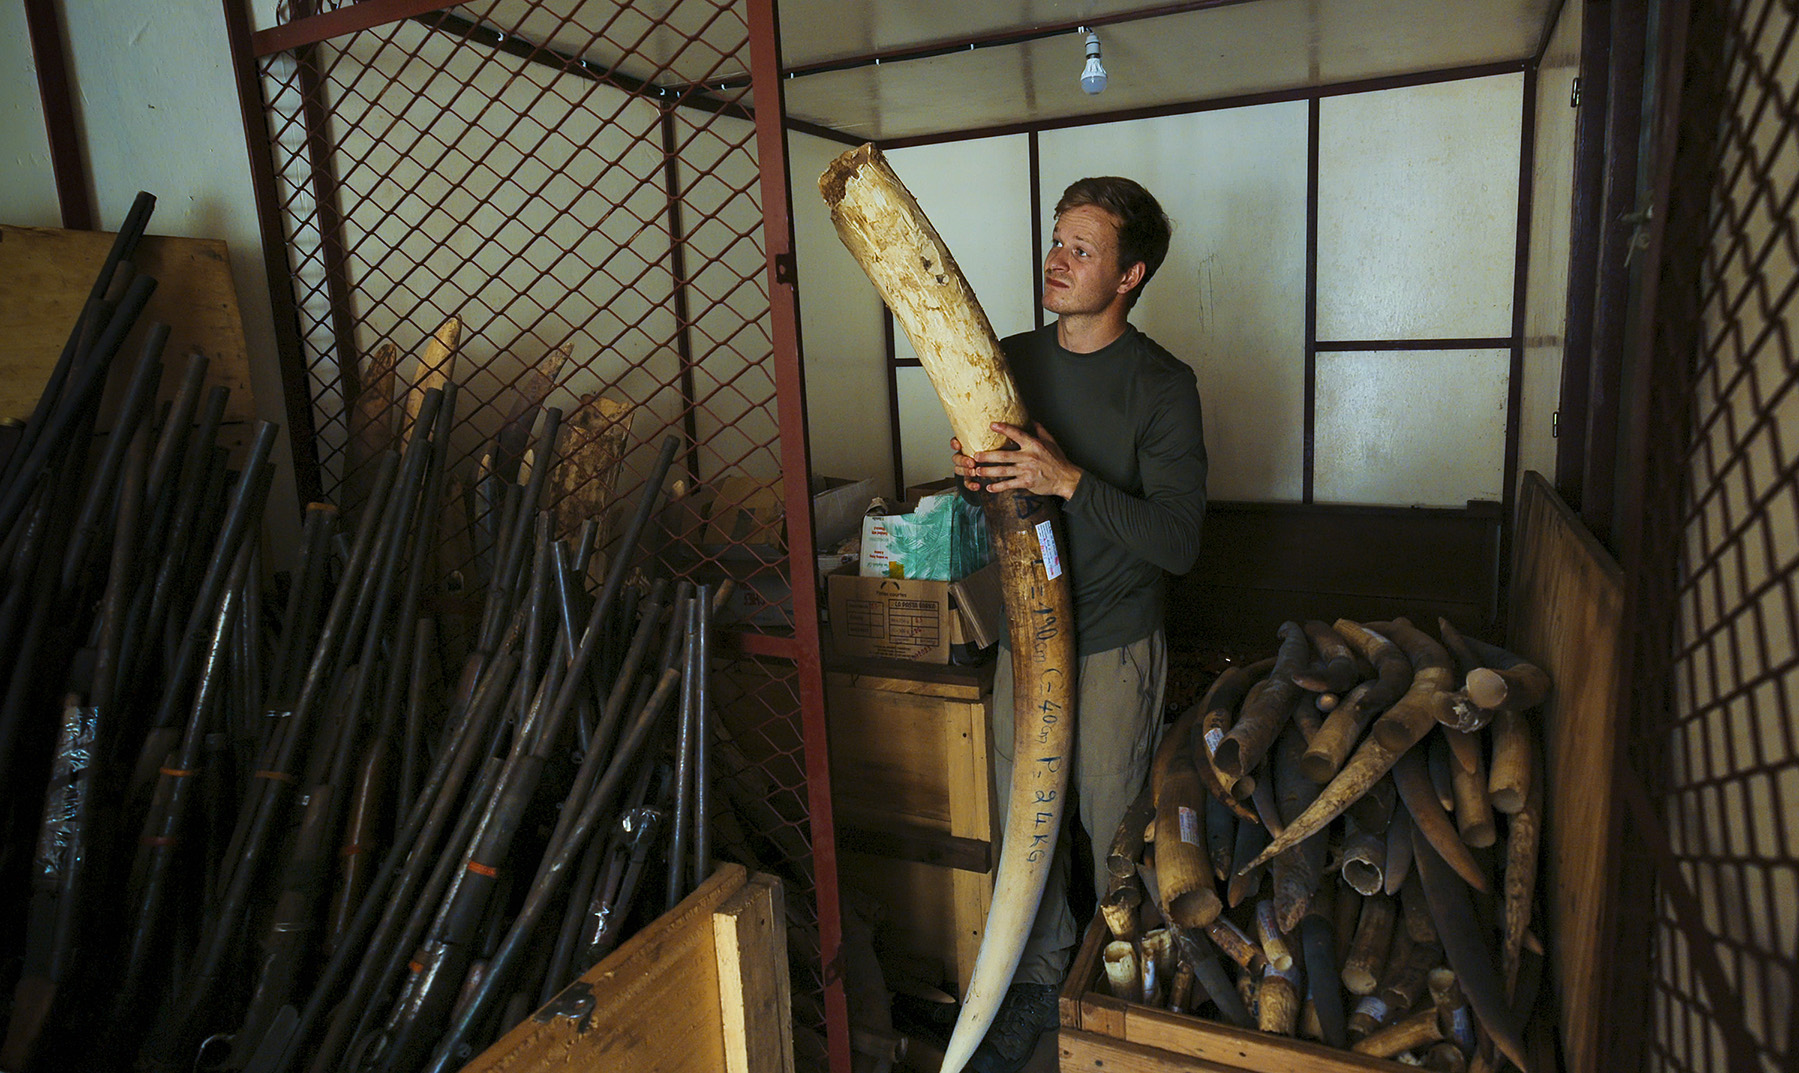 Bertie Gregory holding a massive tusk in a cage full of confiscated tusks.